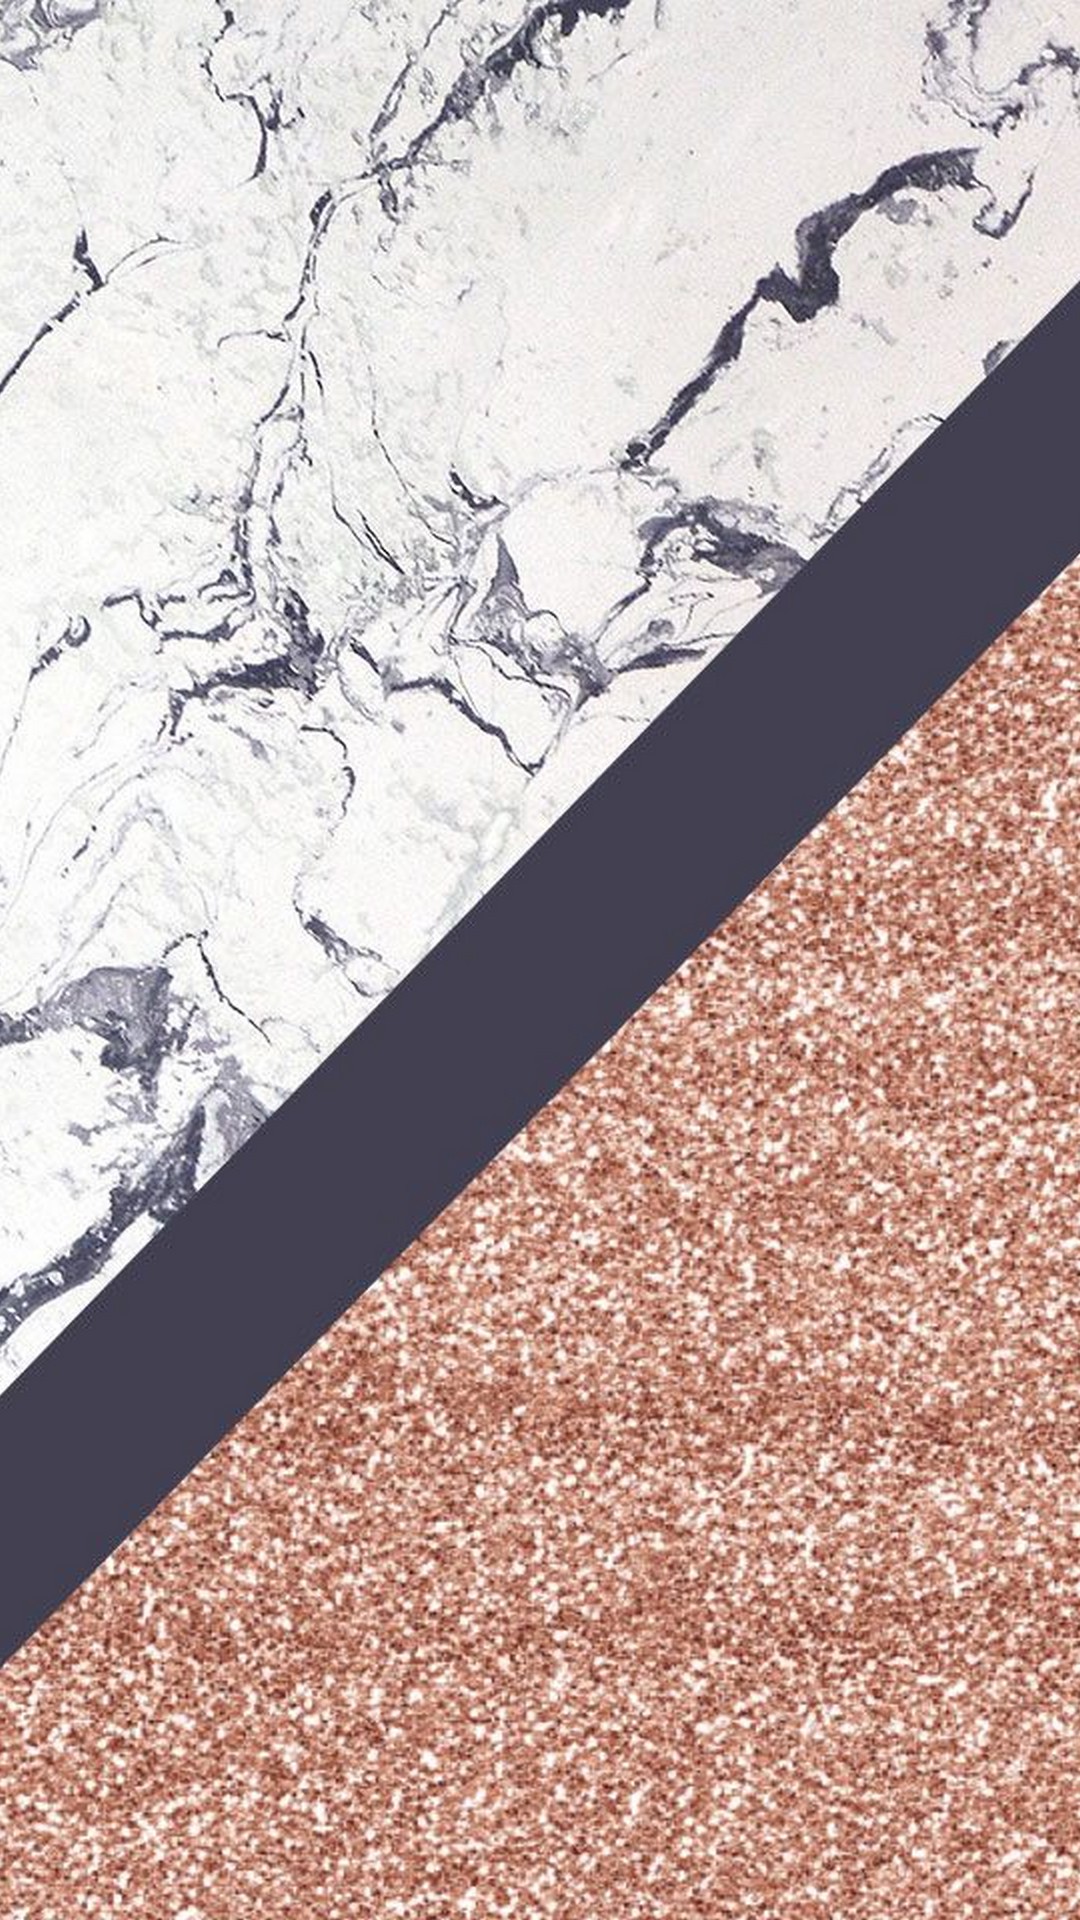 iPhone 7 Wallpaper Rose Gold Marble resolution 1080x1920